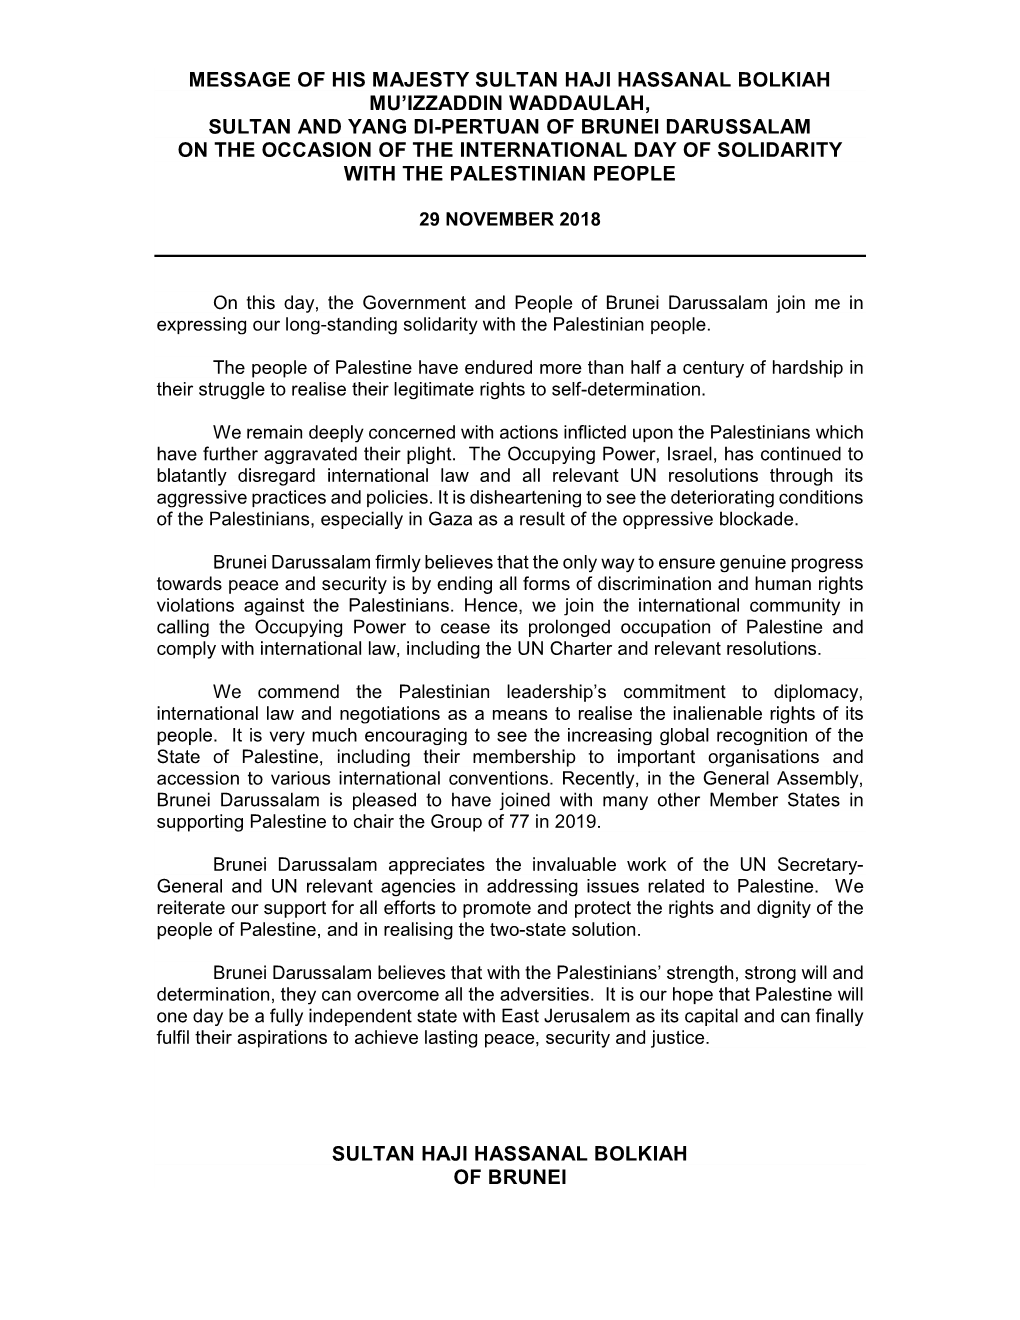 Brunei Darussalam on the Occasion of the International Day of Solidarity with the Palestinian People